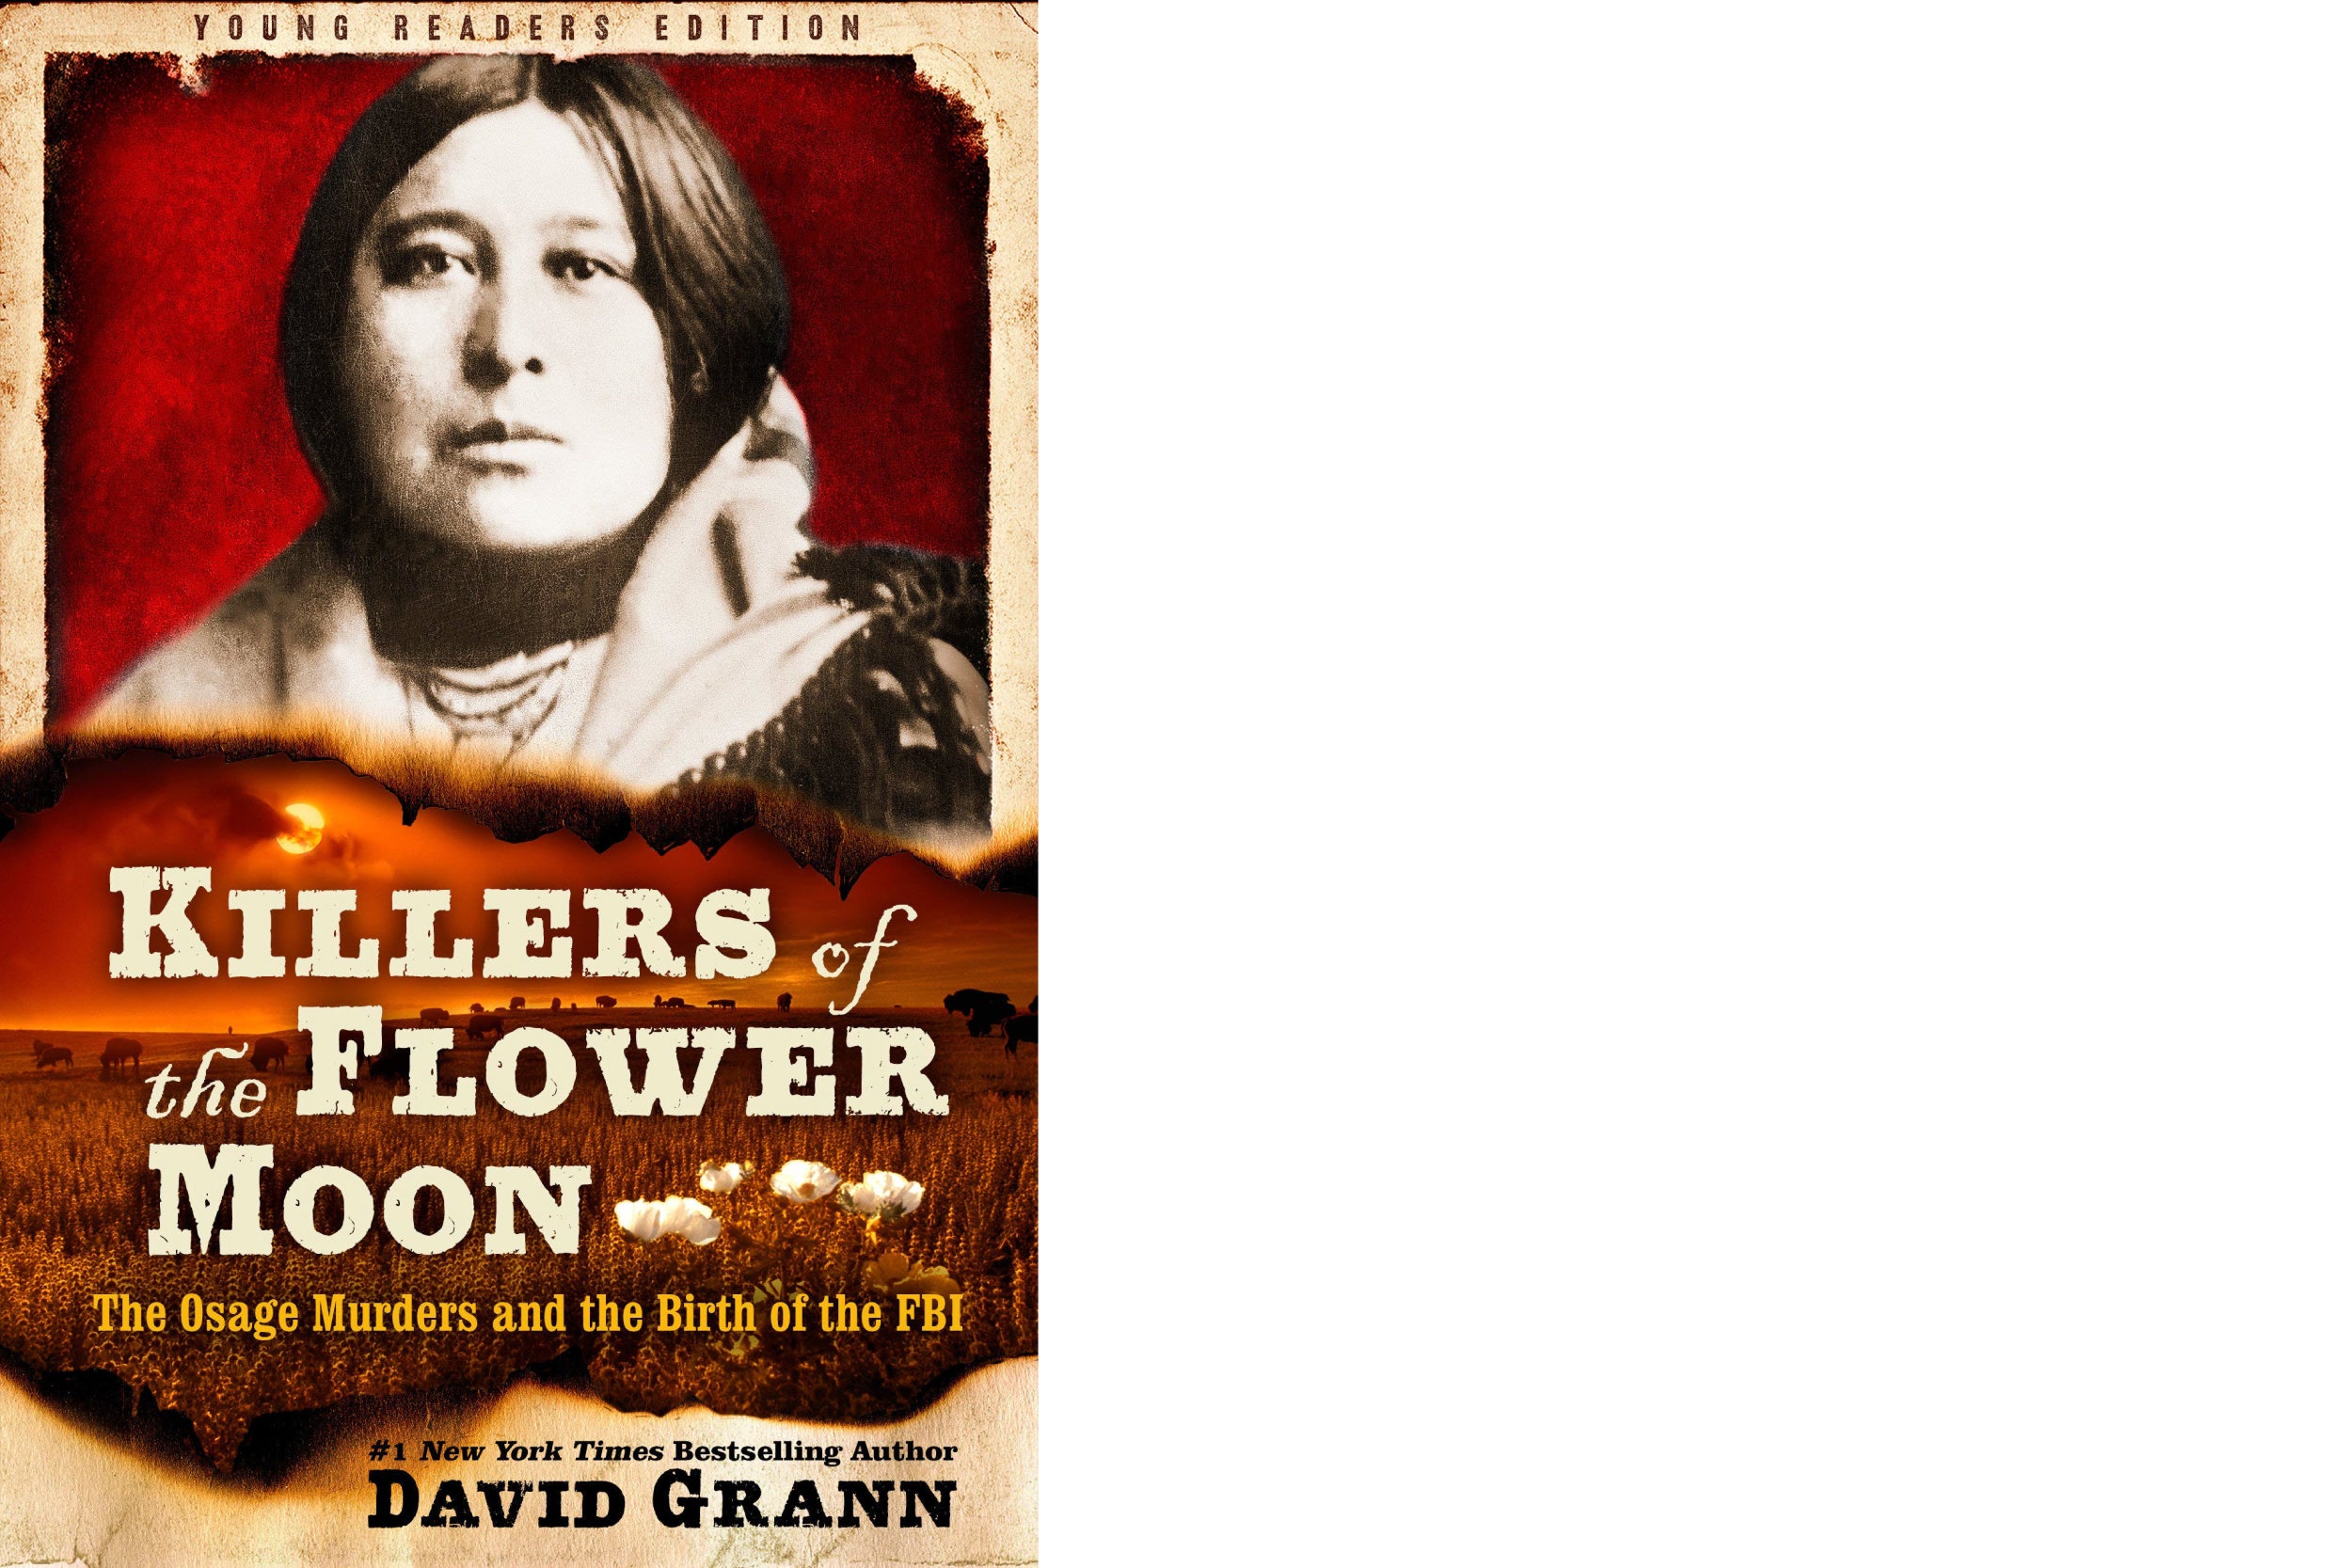 Book cover: “Killers of the Flower Moon: The Osage Murders and the Birth of the FBI” (Adapted for Young Readers) by David Grann.